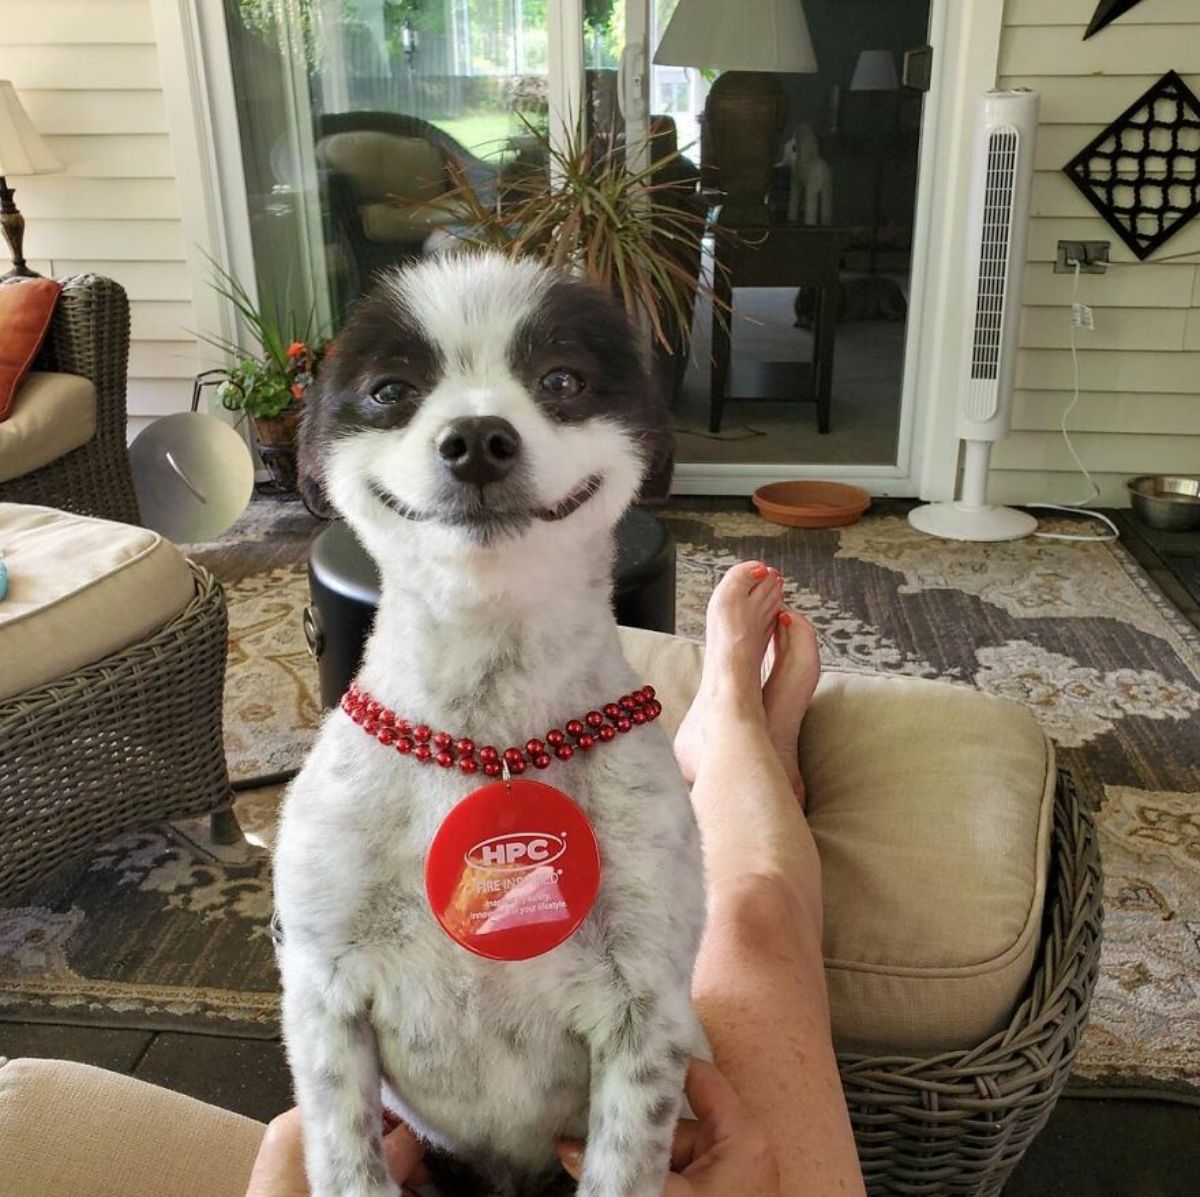 black and white dog who looks like he's smiling sitting on someone's lap wearing a red chain and fire certification pendant